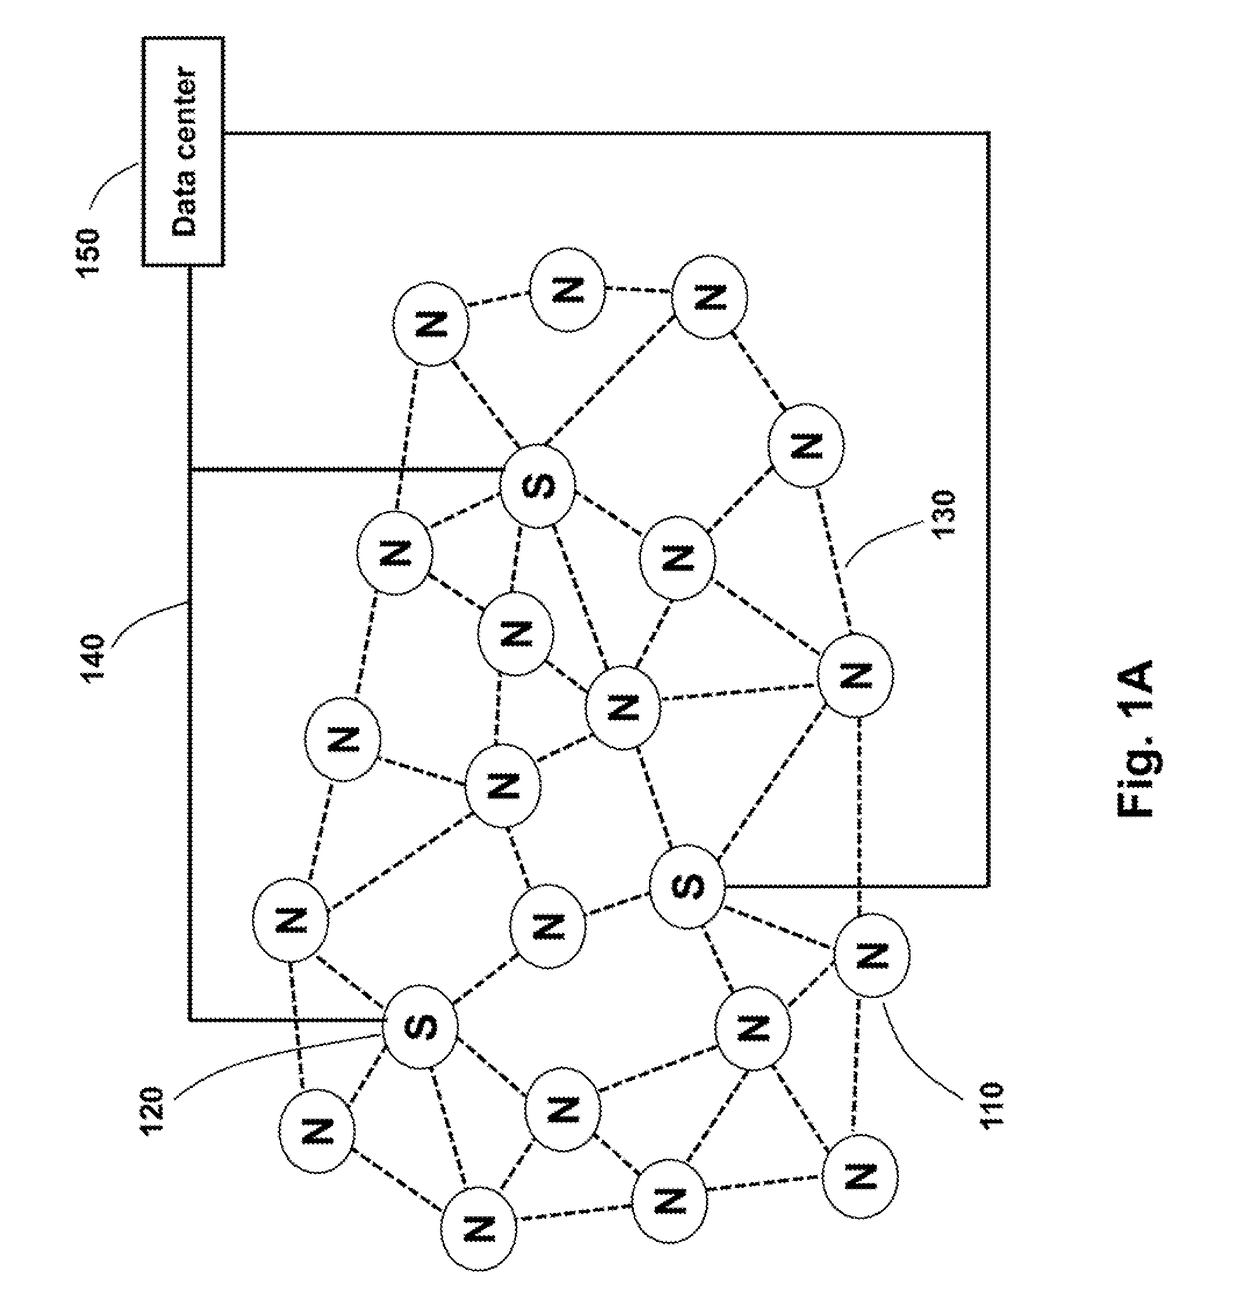 Synchronized multi-sink routing for wireless networks